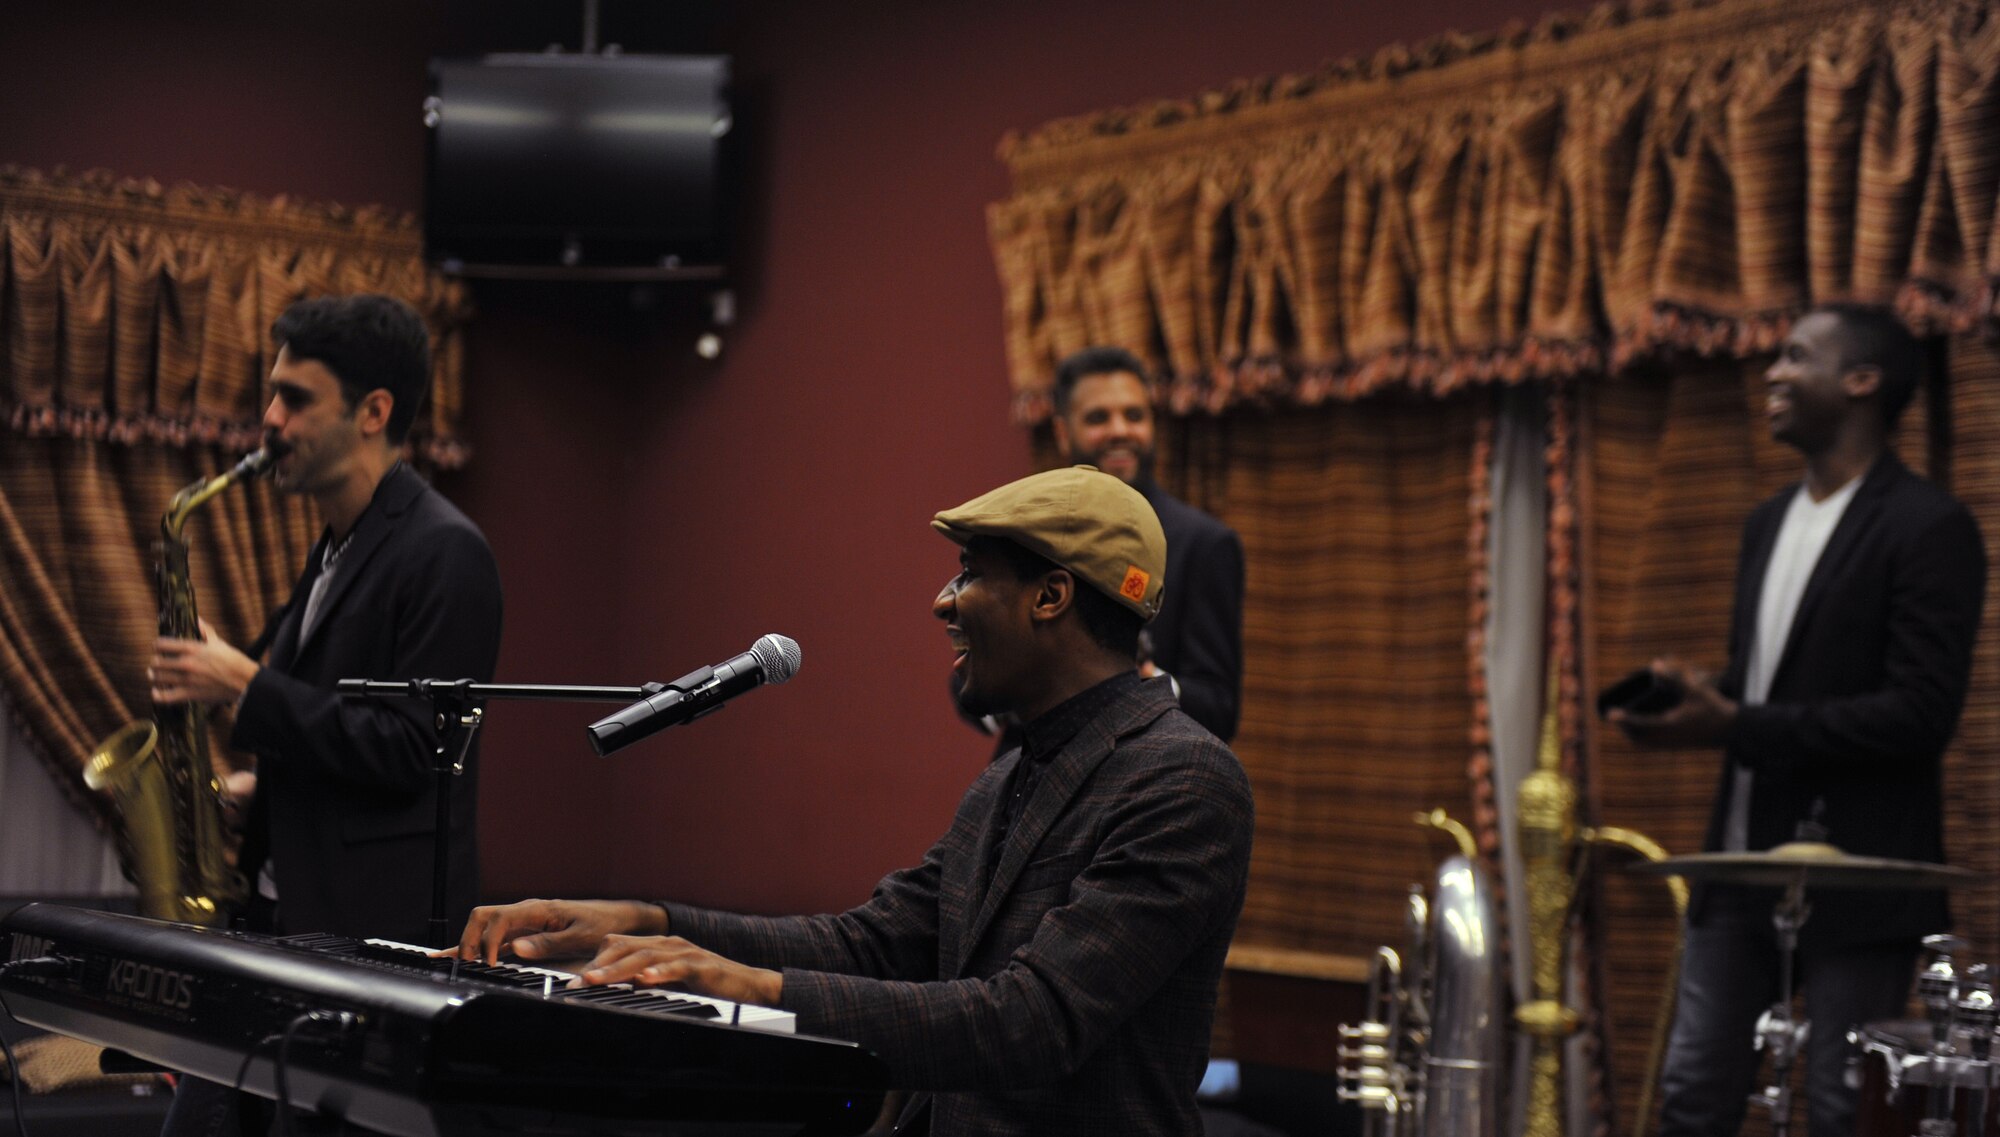 Jonathan Batiste and the Stay Human Band perform for service members at the 379th Air Expeditionary Wing, Southwest Asia, on Dec. 8, 2013. The band played modern jazz at the Kasbah which is one of the entertainment venues here. (U.S. Air Force photo/Master Sgt. David Miller)